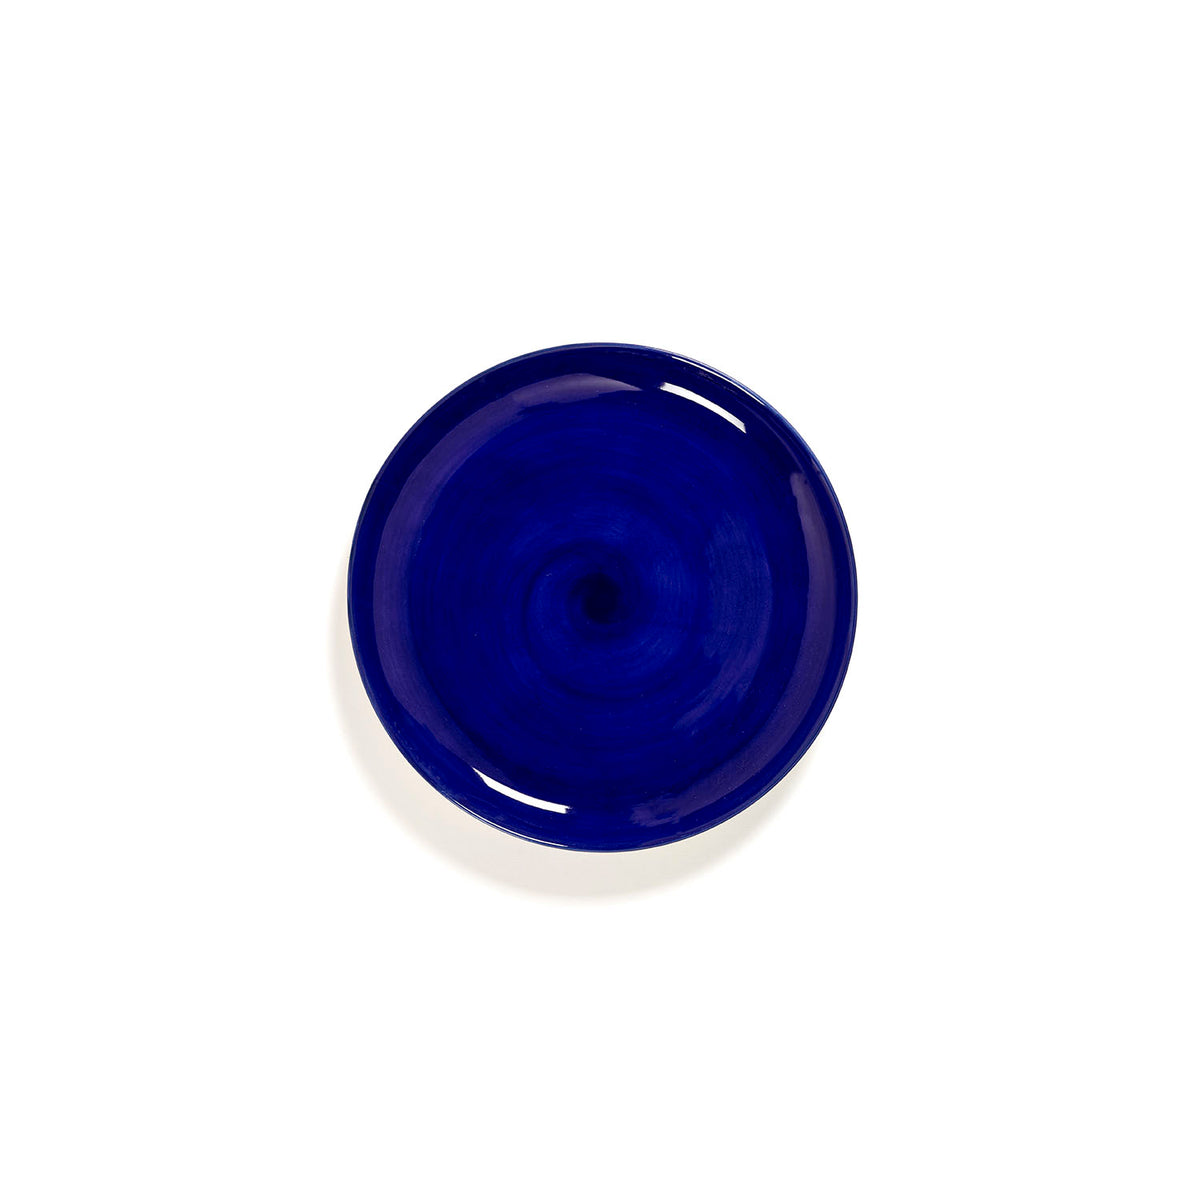 Ottolenghi for Serax Feast collection; medium plate, with lapis lazuli design.